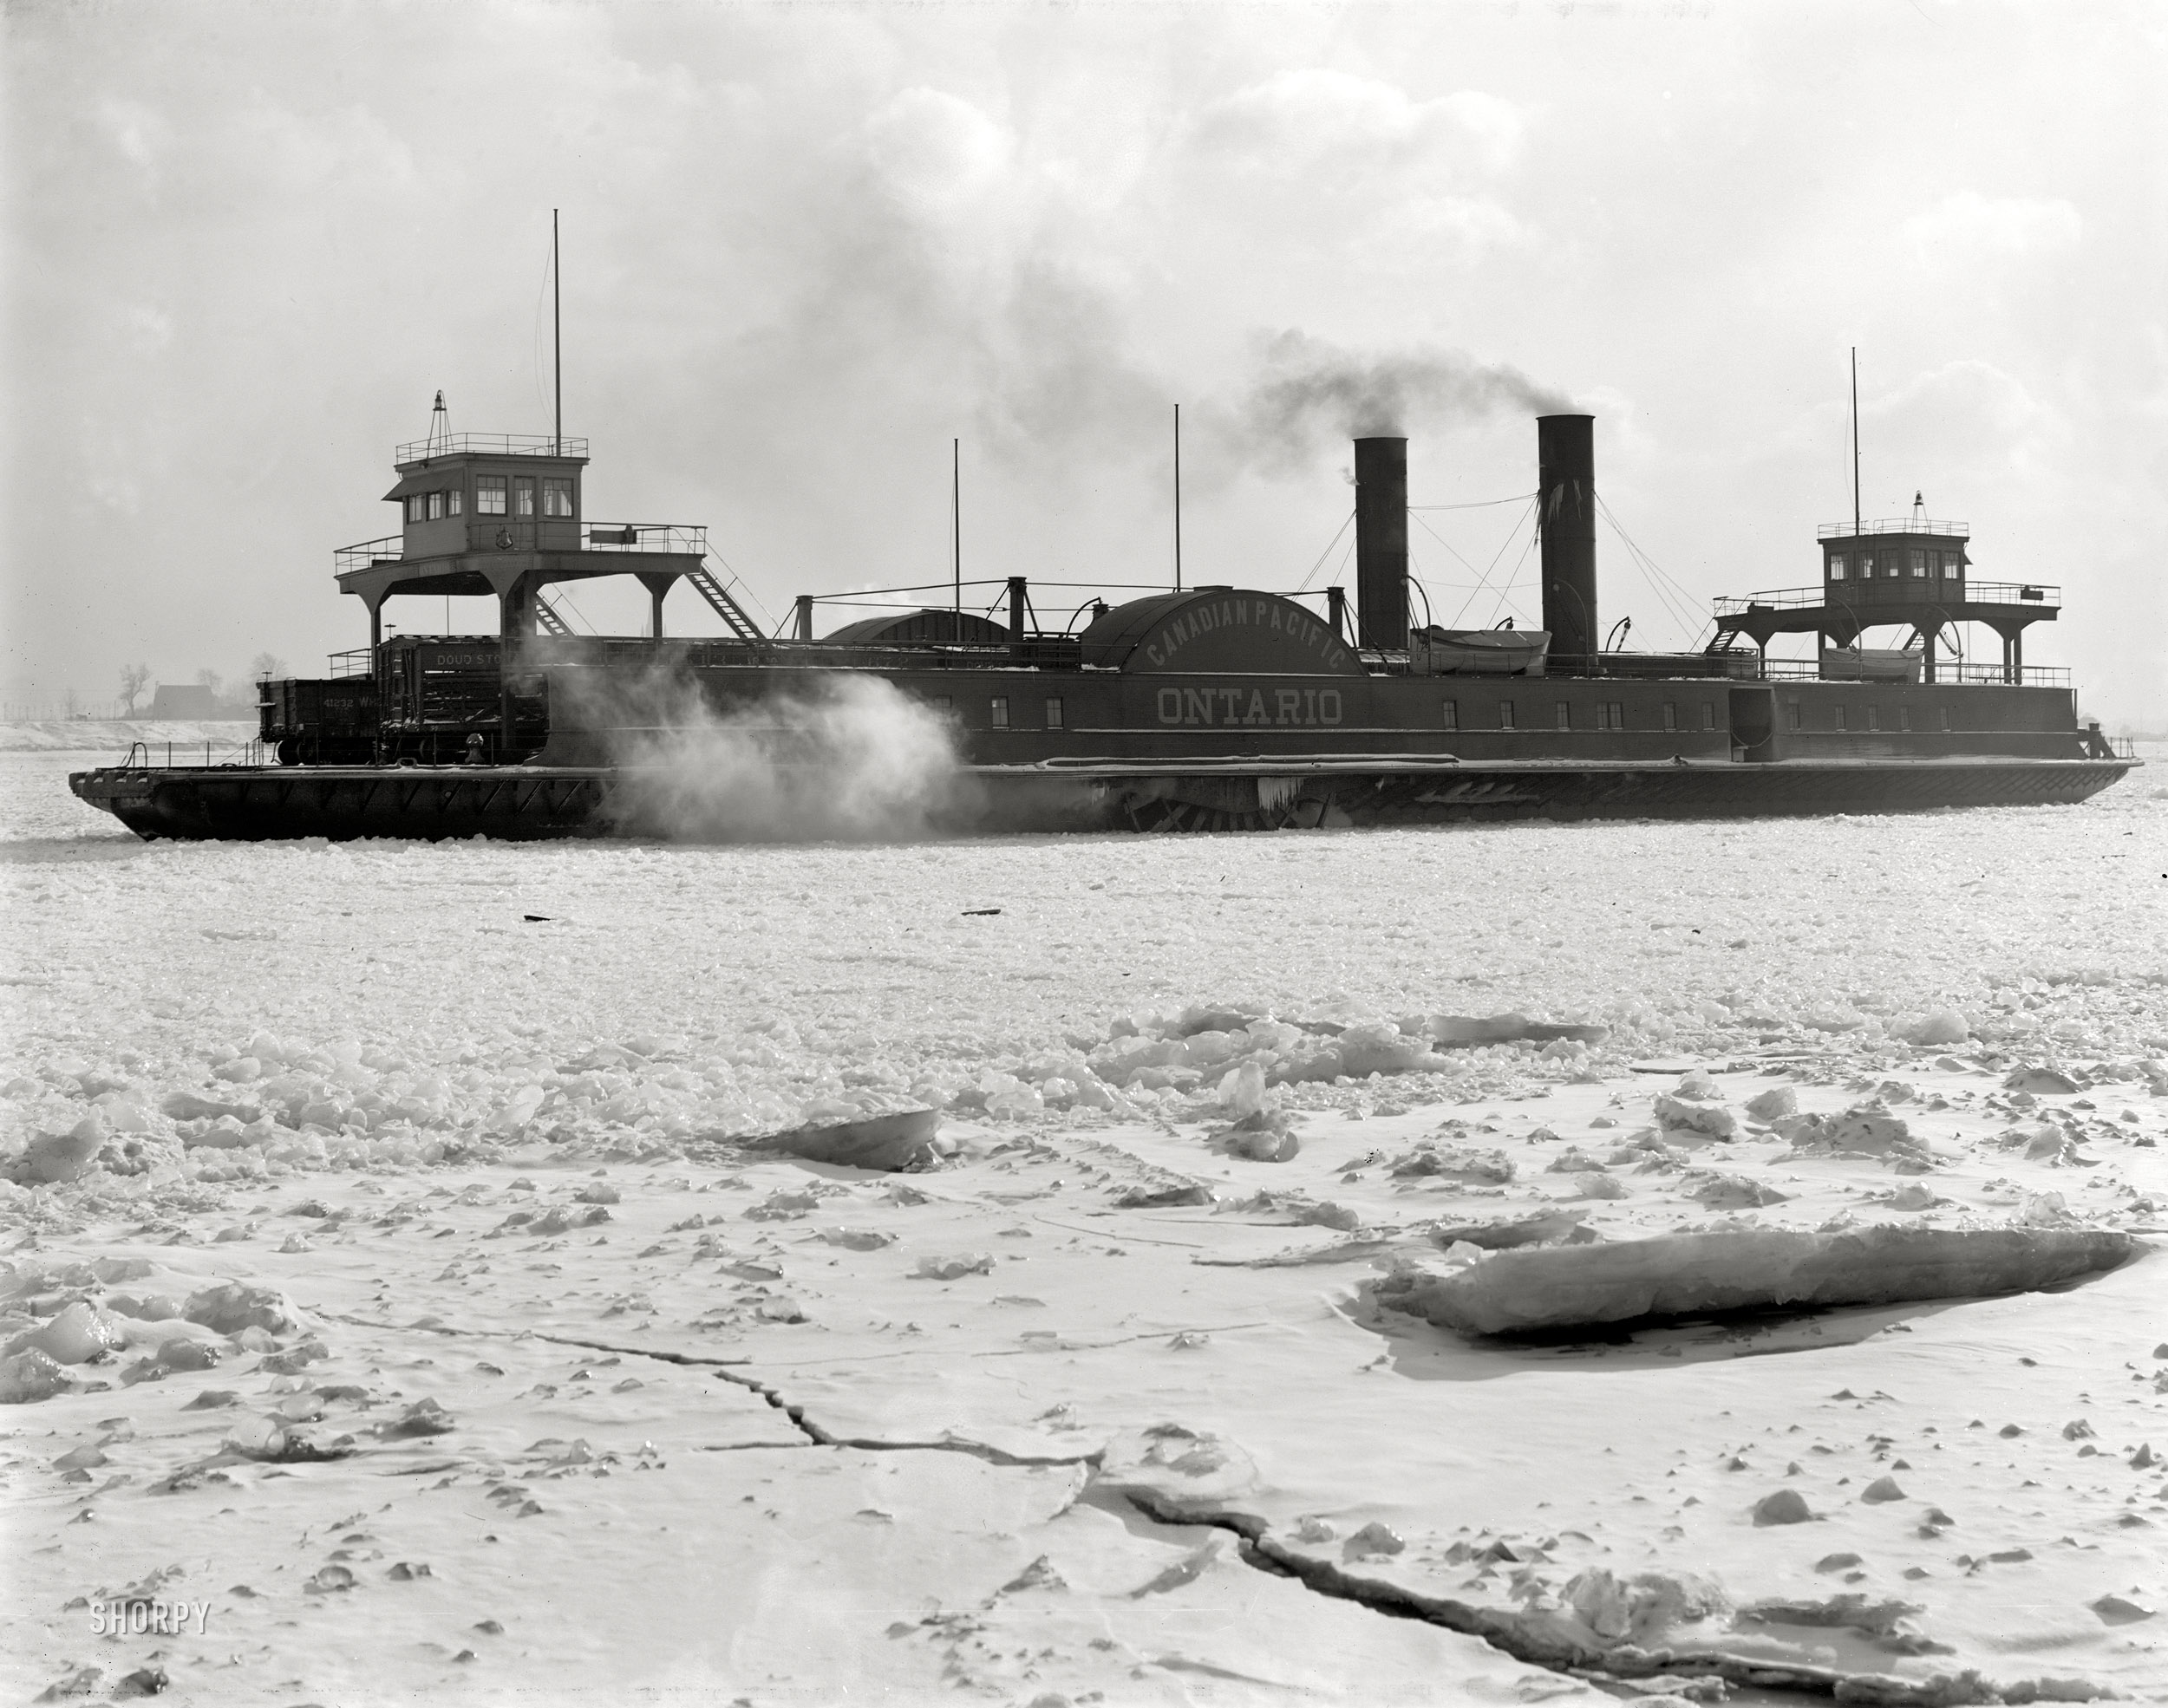 Circa 1905. "Canadian Pacific transfer steamer Ontario in the ice." 8x10 inch dry plate glass negative, Detroit Publishing Company. View full size.